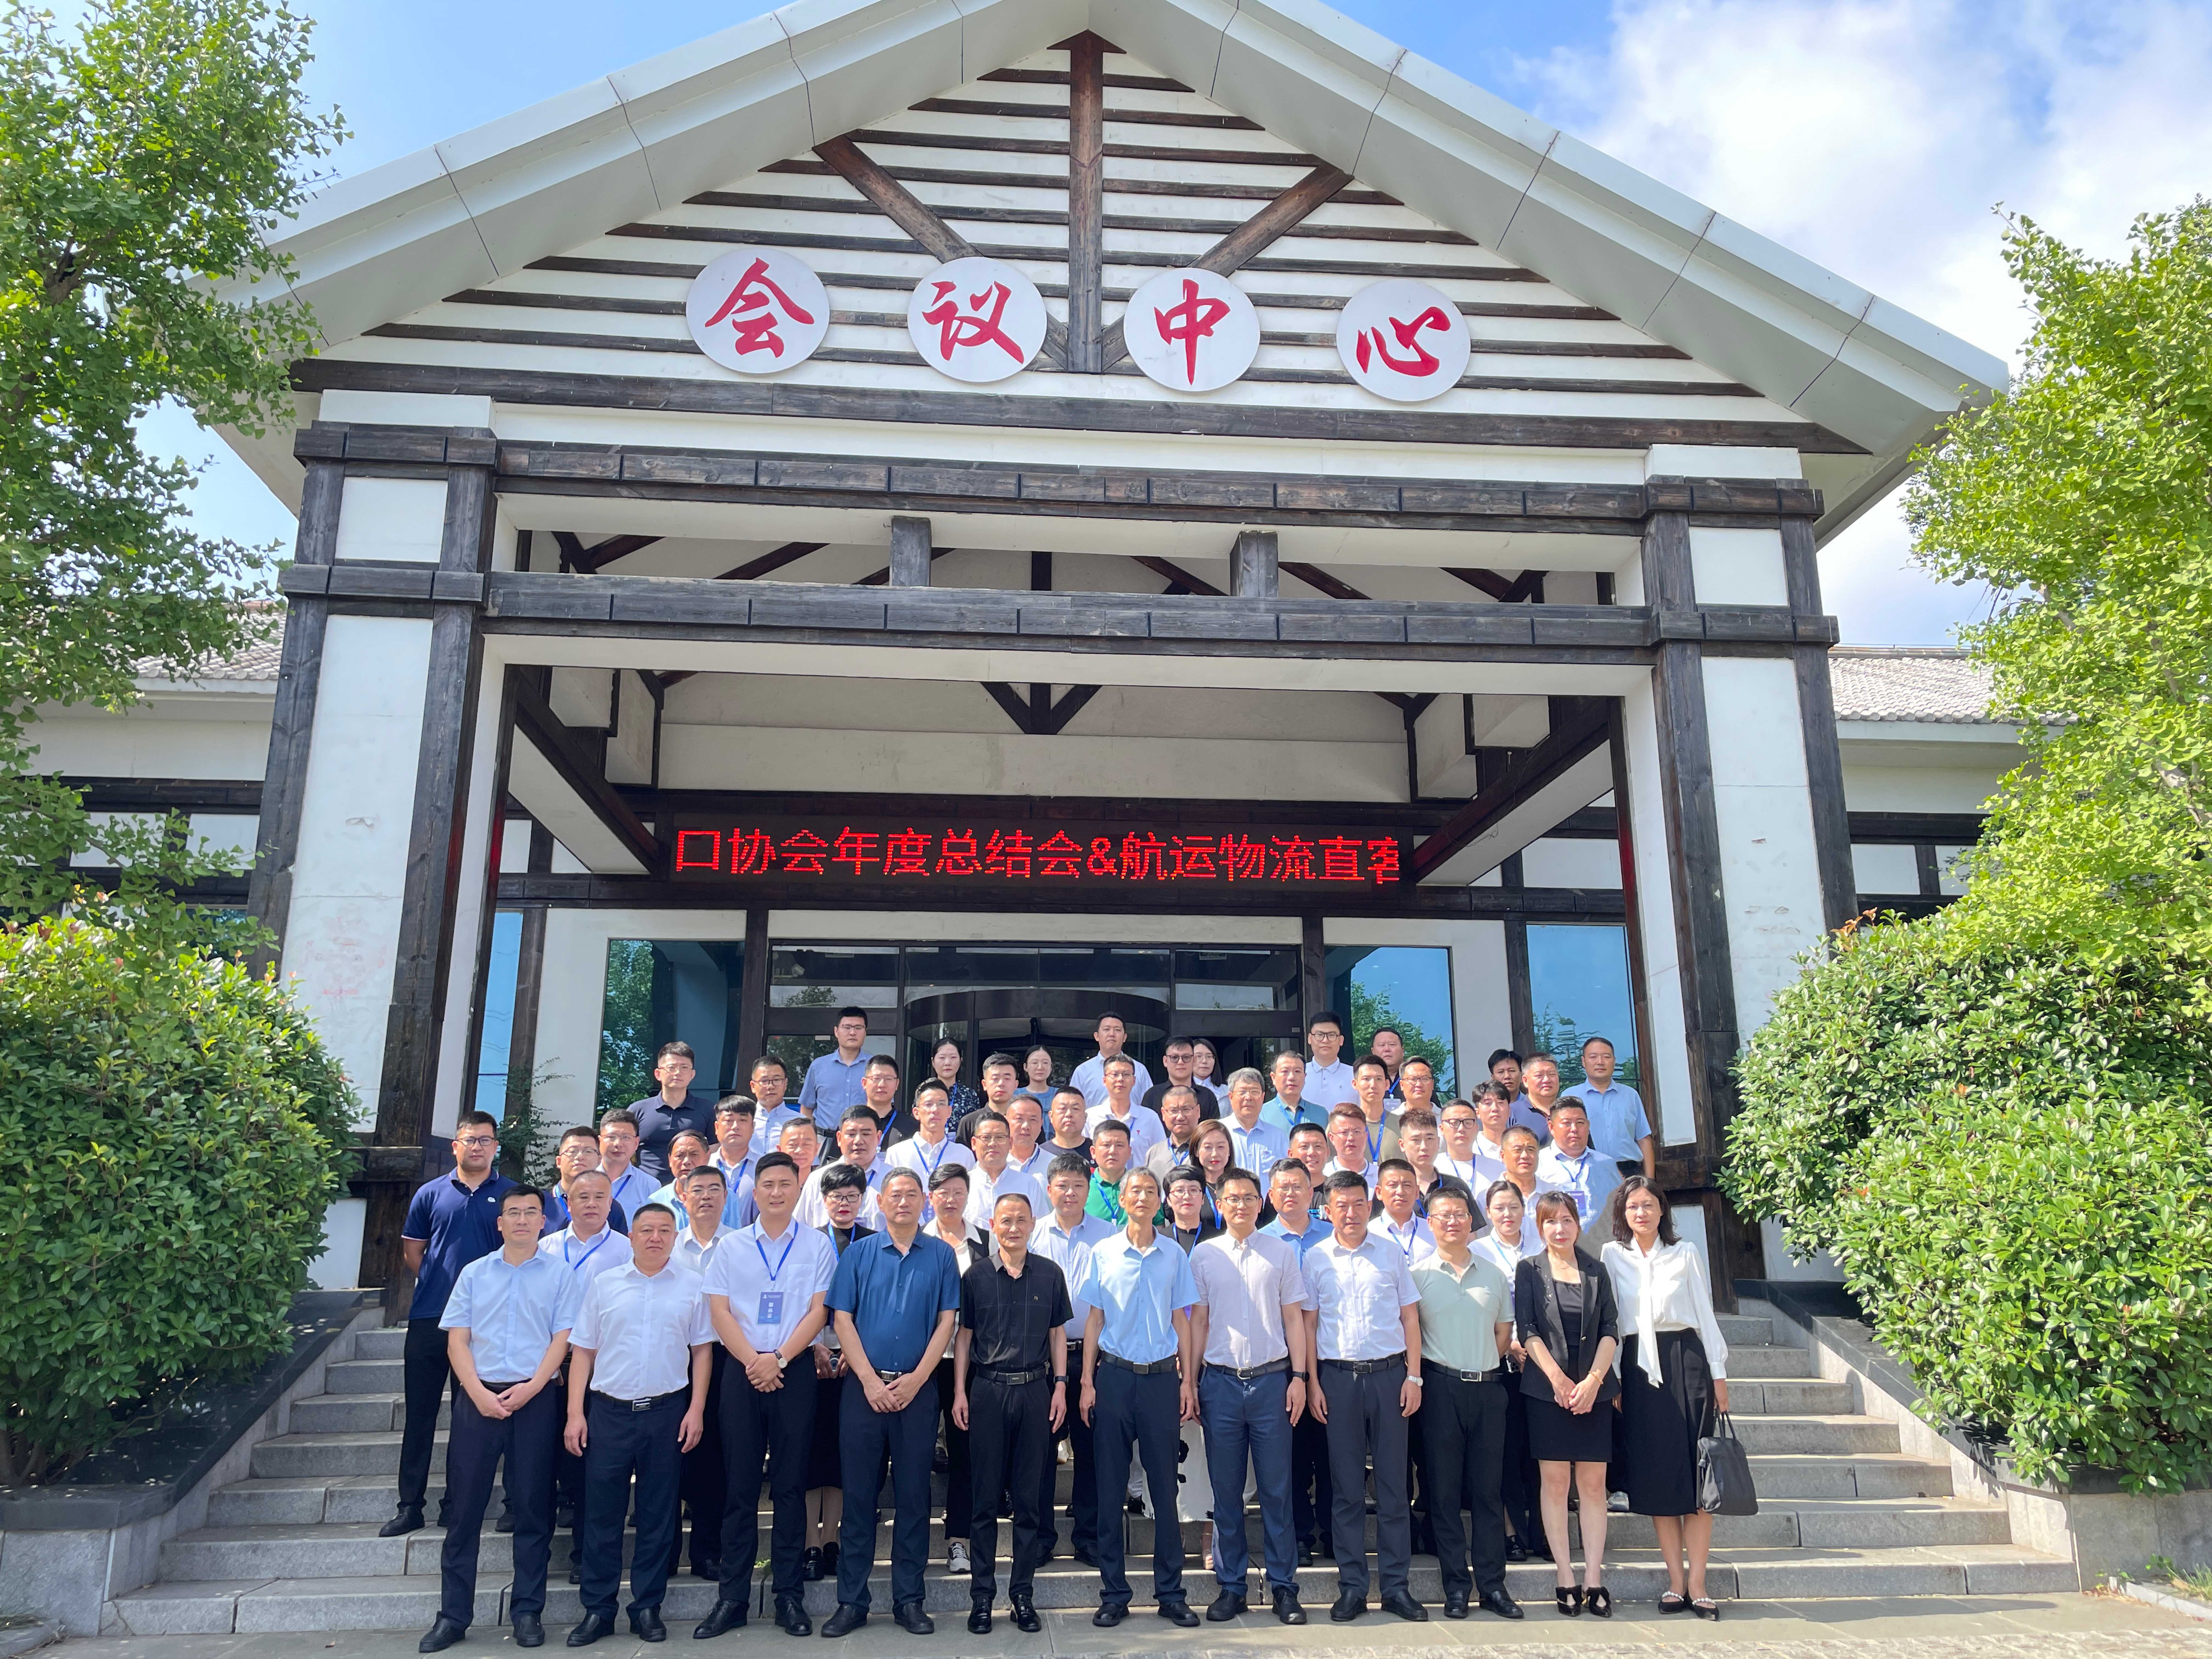 Shandong Limaotong Supply Chain Management Service Co., Ltd. was awarded the Vice president unit of Shandong Second-hand Car Export Association